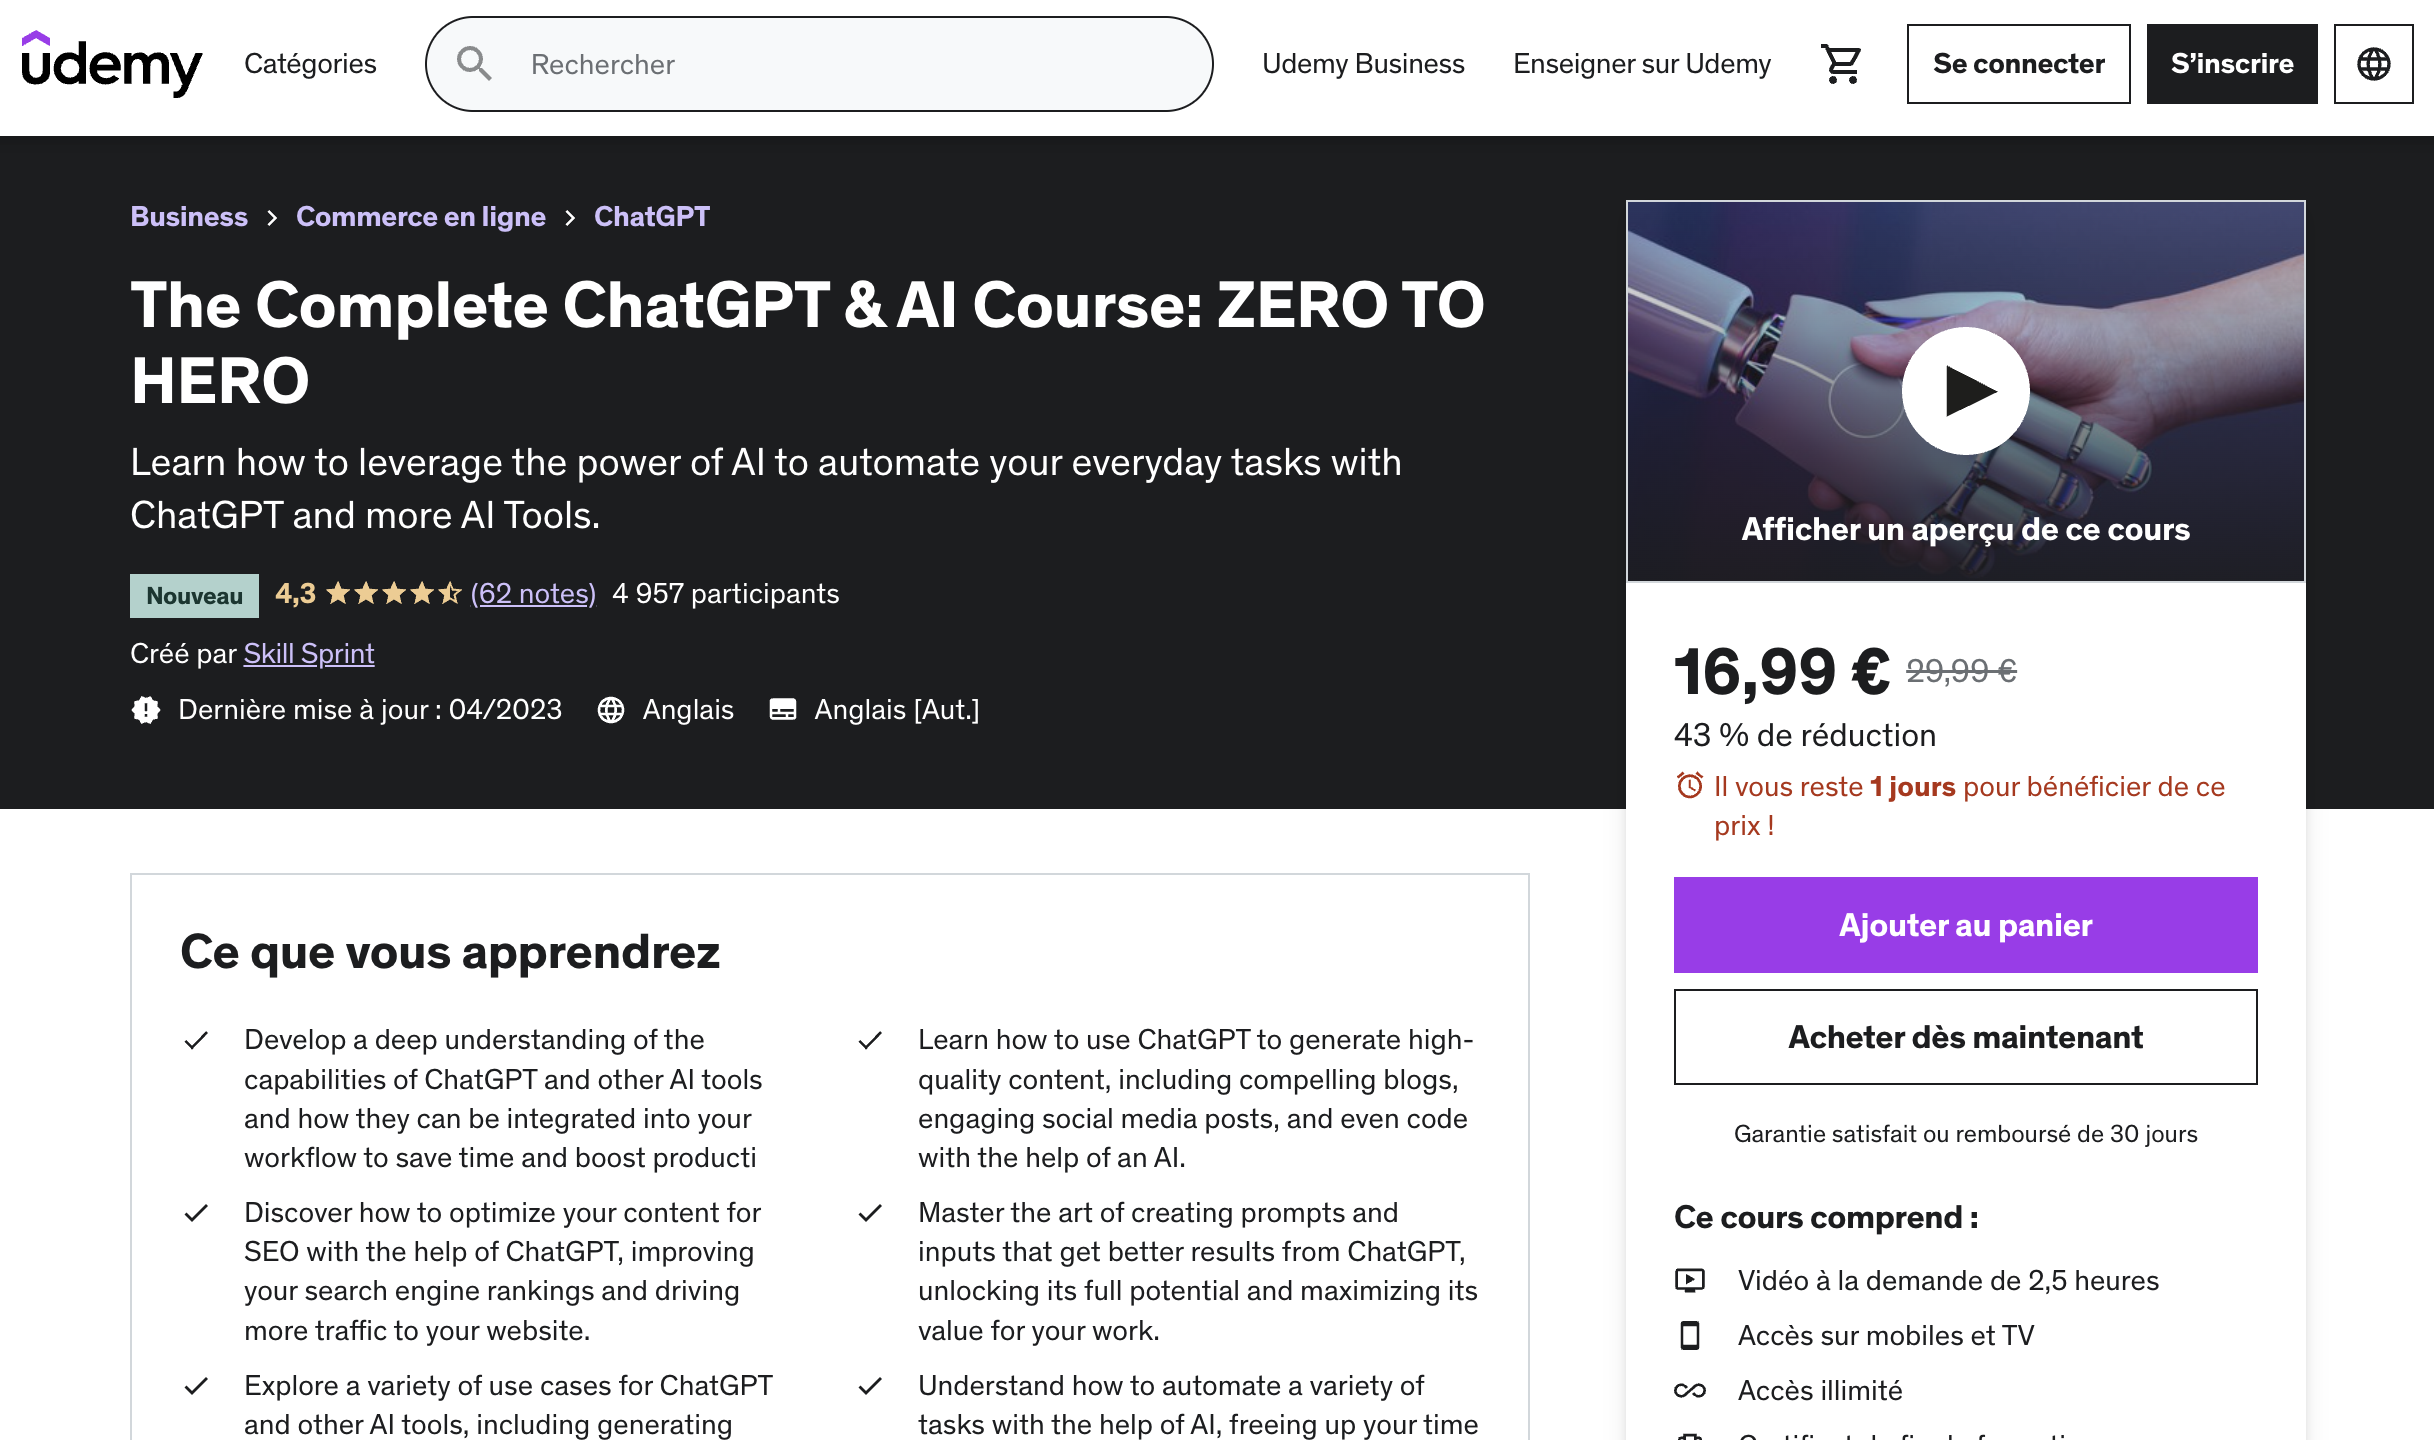 The Complete ChatGPT & AI Course